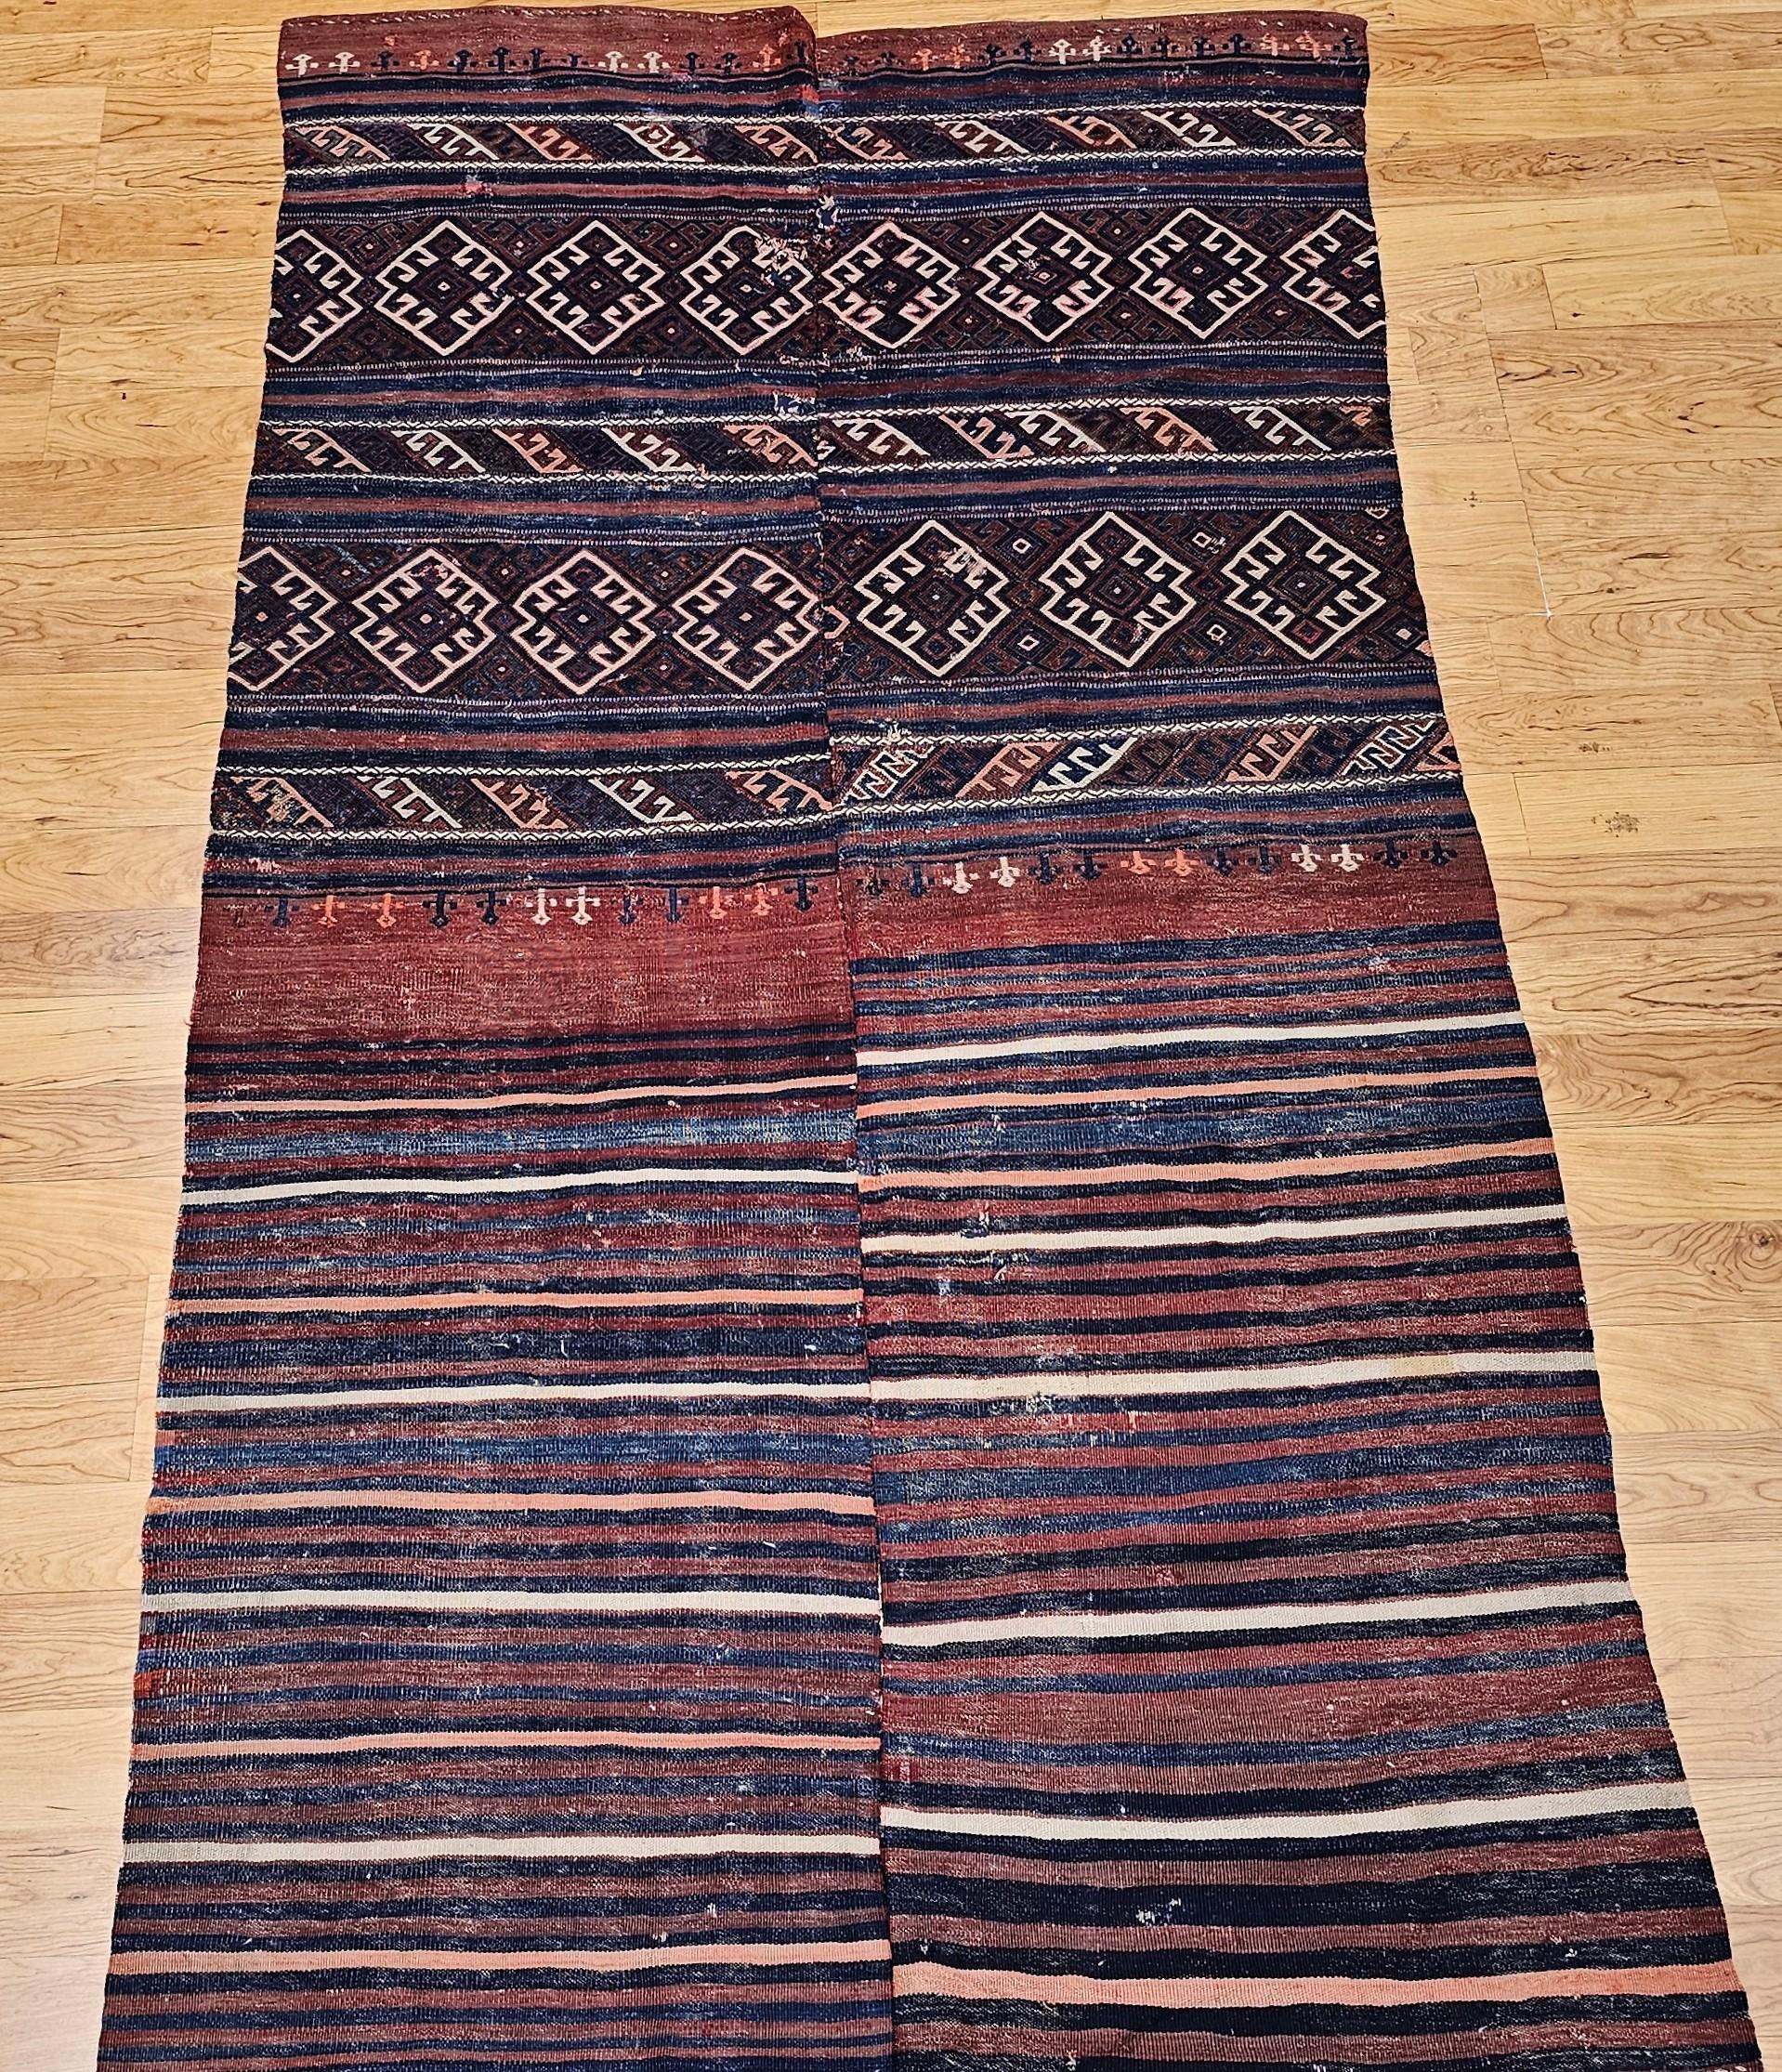 Vintage Turkish Kilim from the early 20th century in indigo blue, burgundy, ivory, and pink.  The kilim has traditional hooked star patterns in indigo blue set on a brick red or burgundy background color.  The designed stripes are  separated by